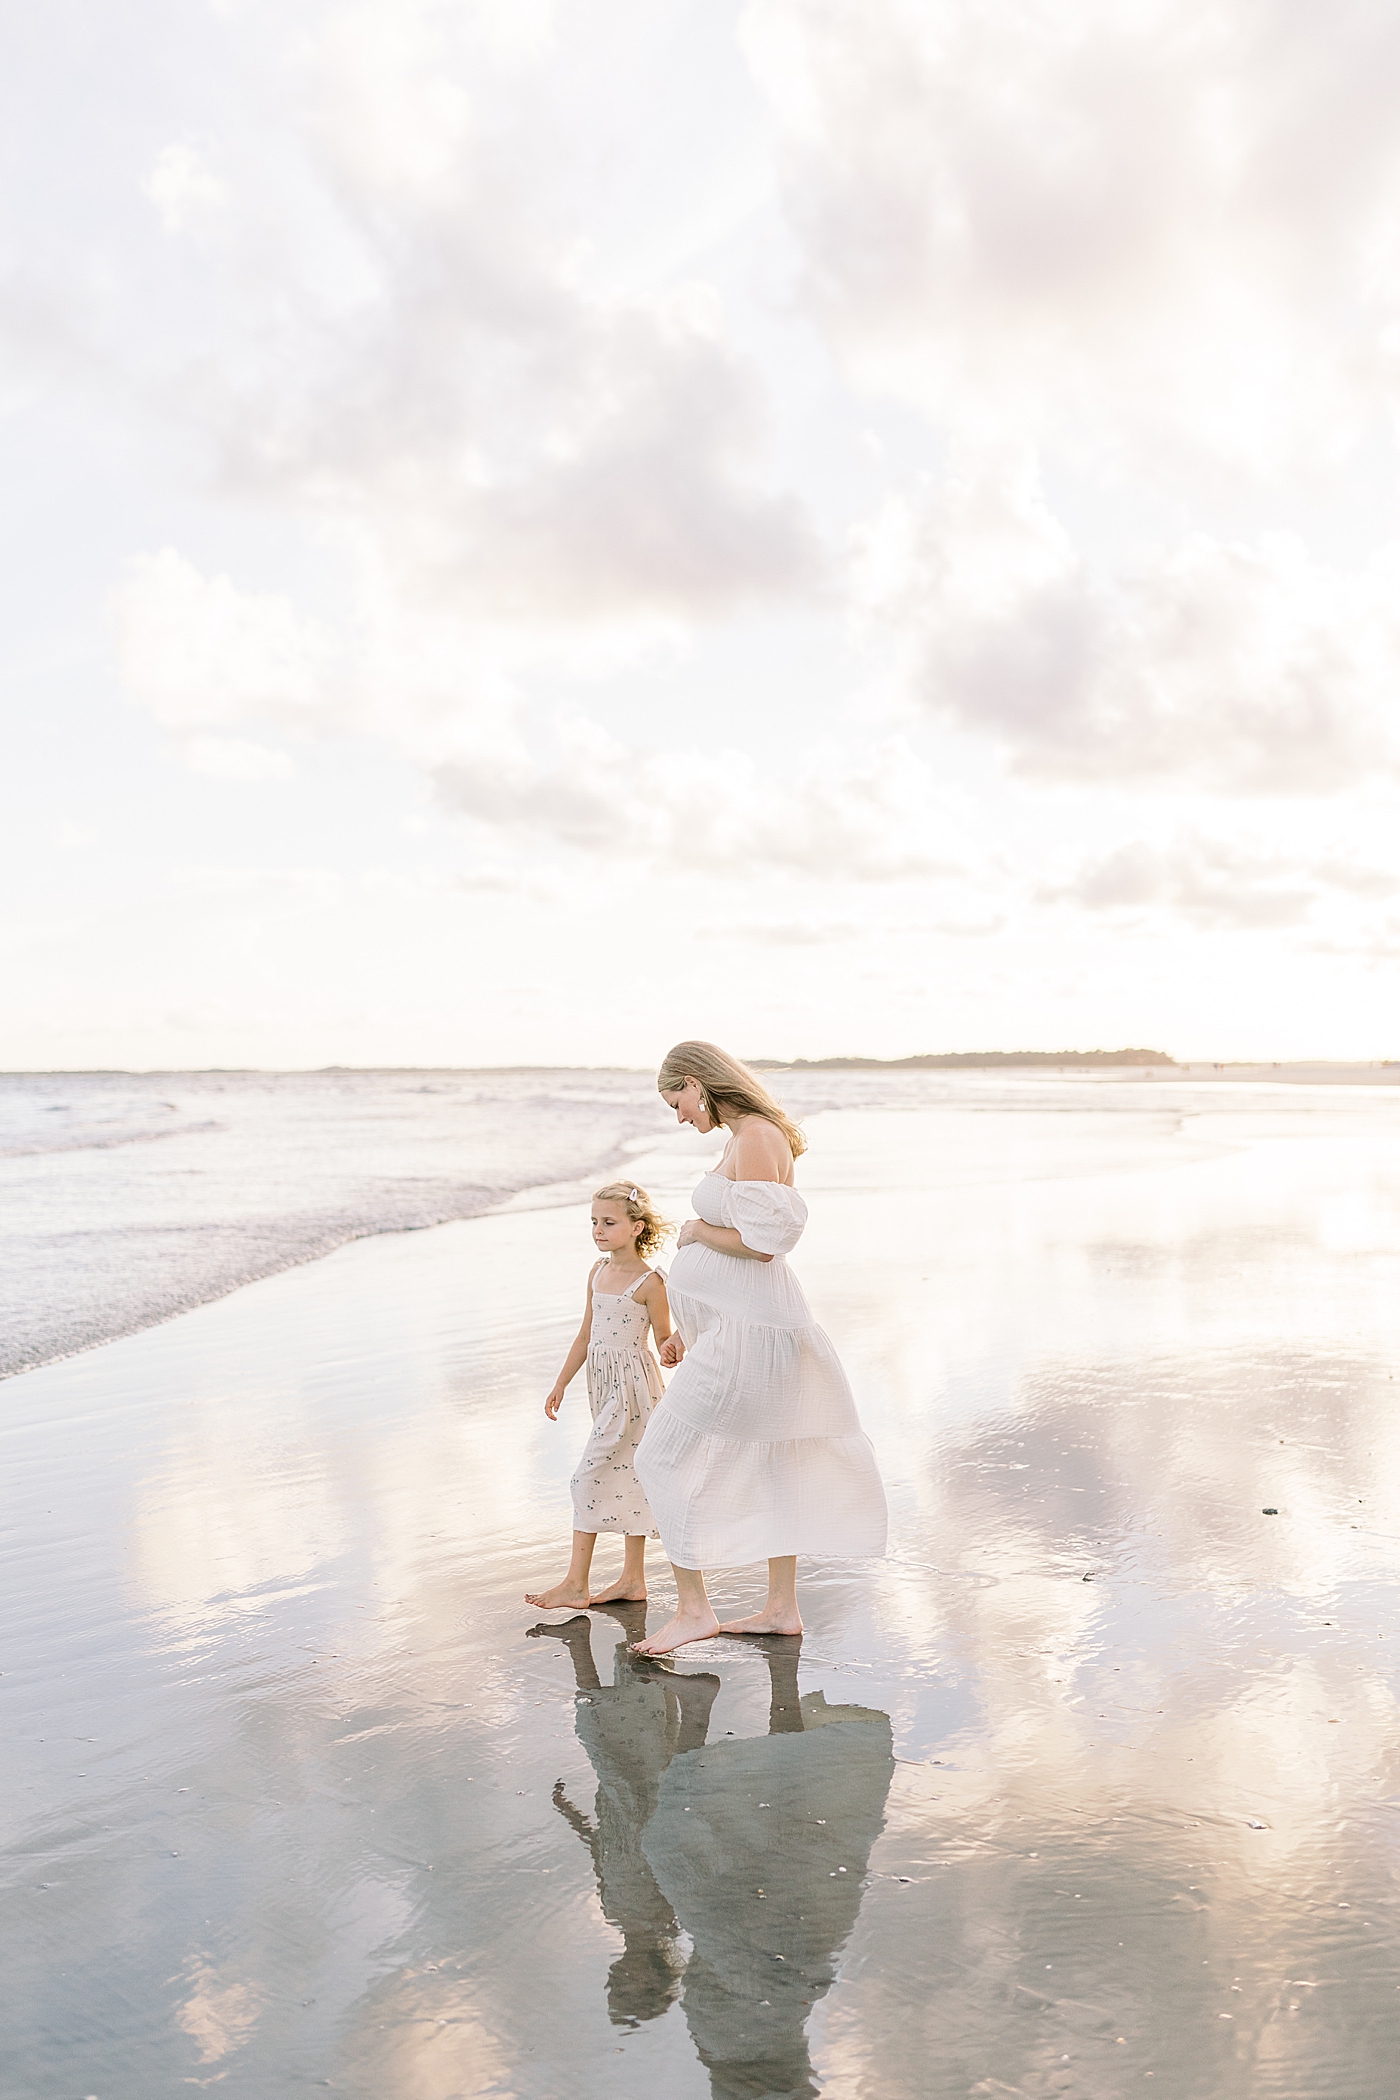 Mom to be and little girl walking on the beach | Image by Caitlyn Motycka